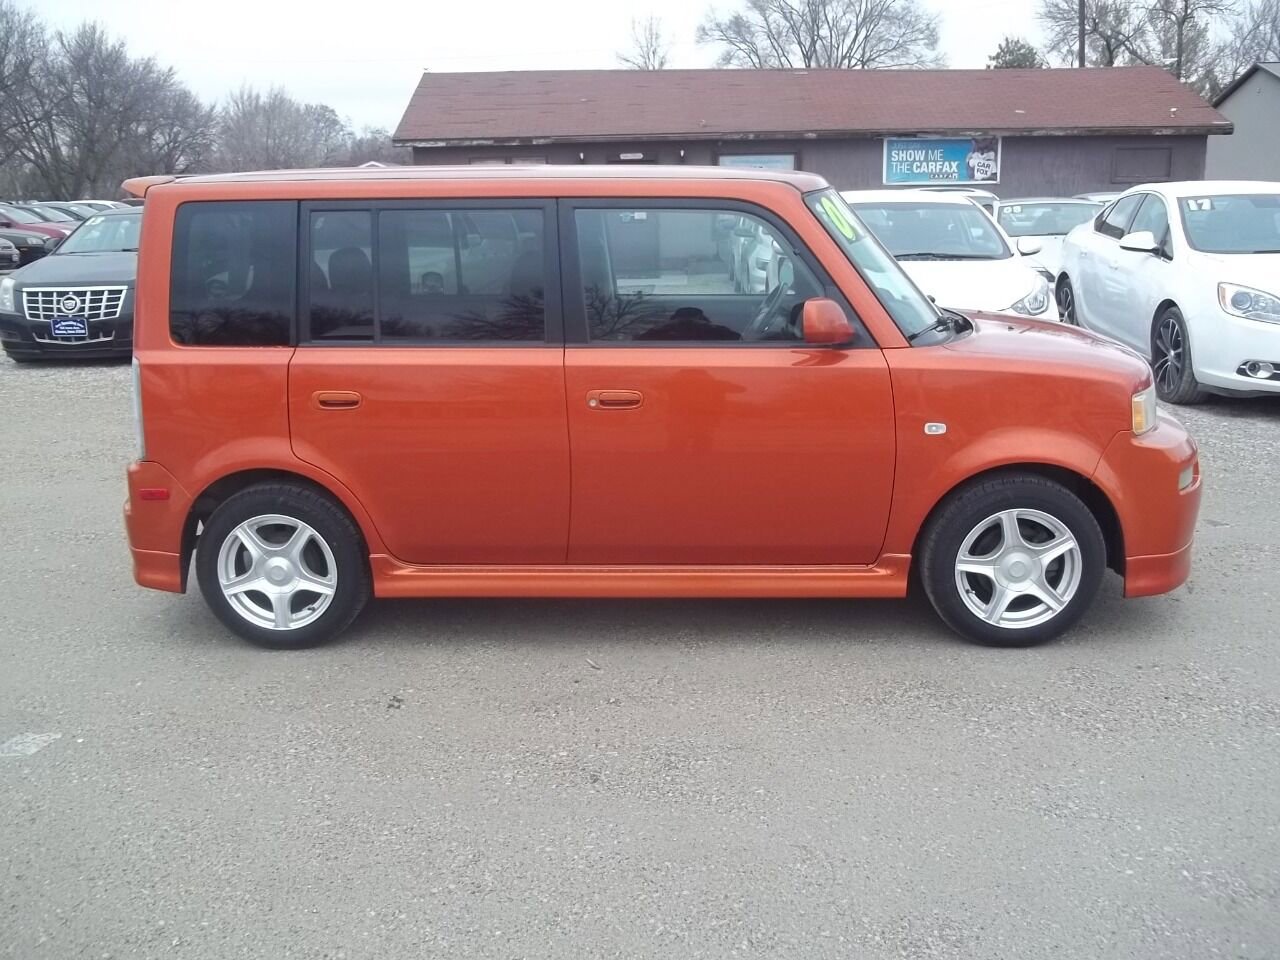 Used 2004 Scion xB for Sale Right Now - Autotrader